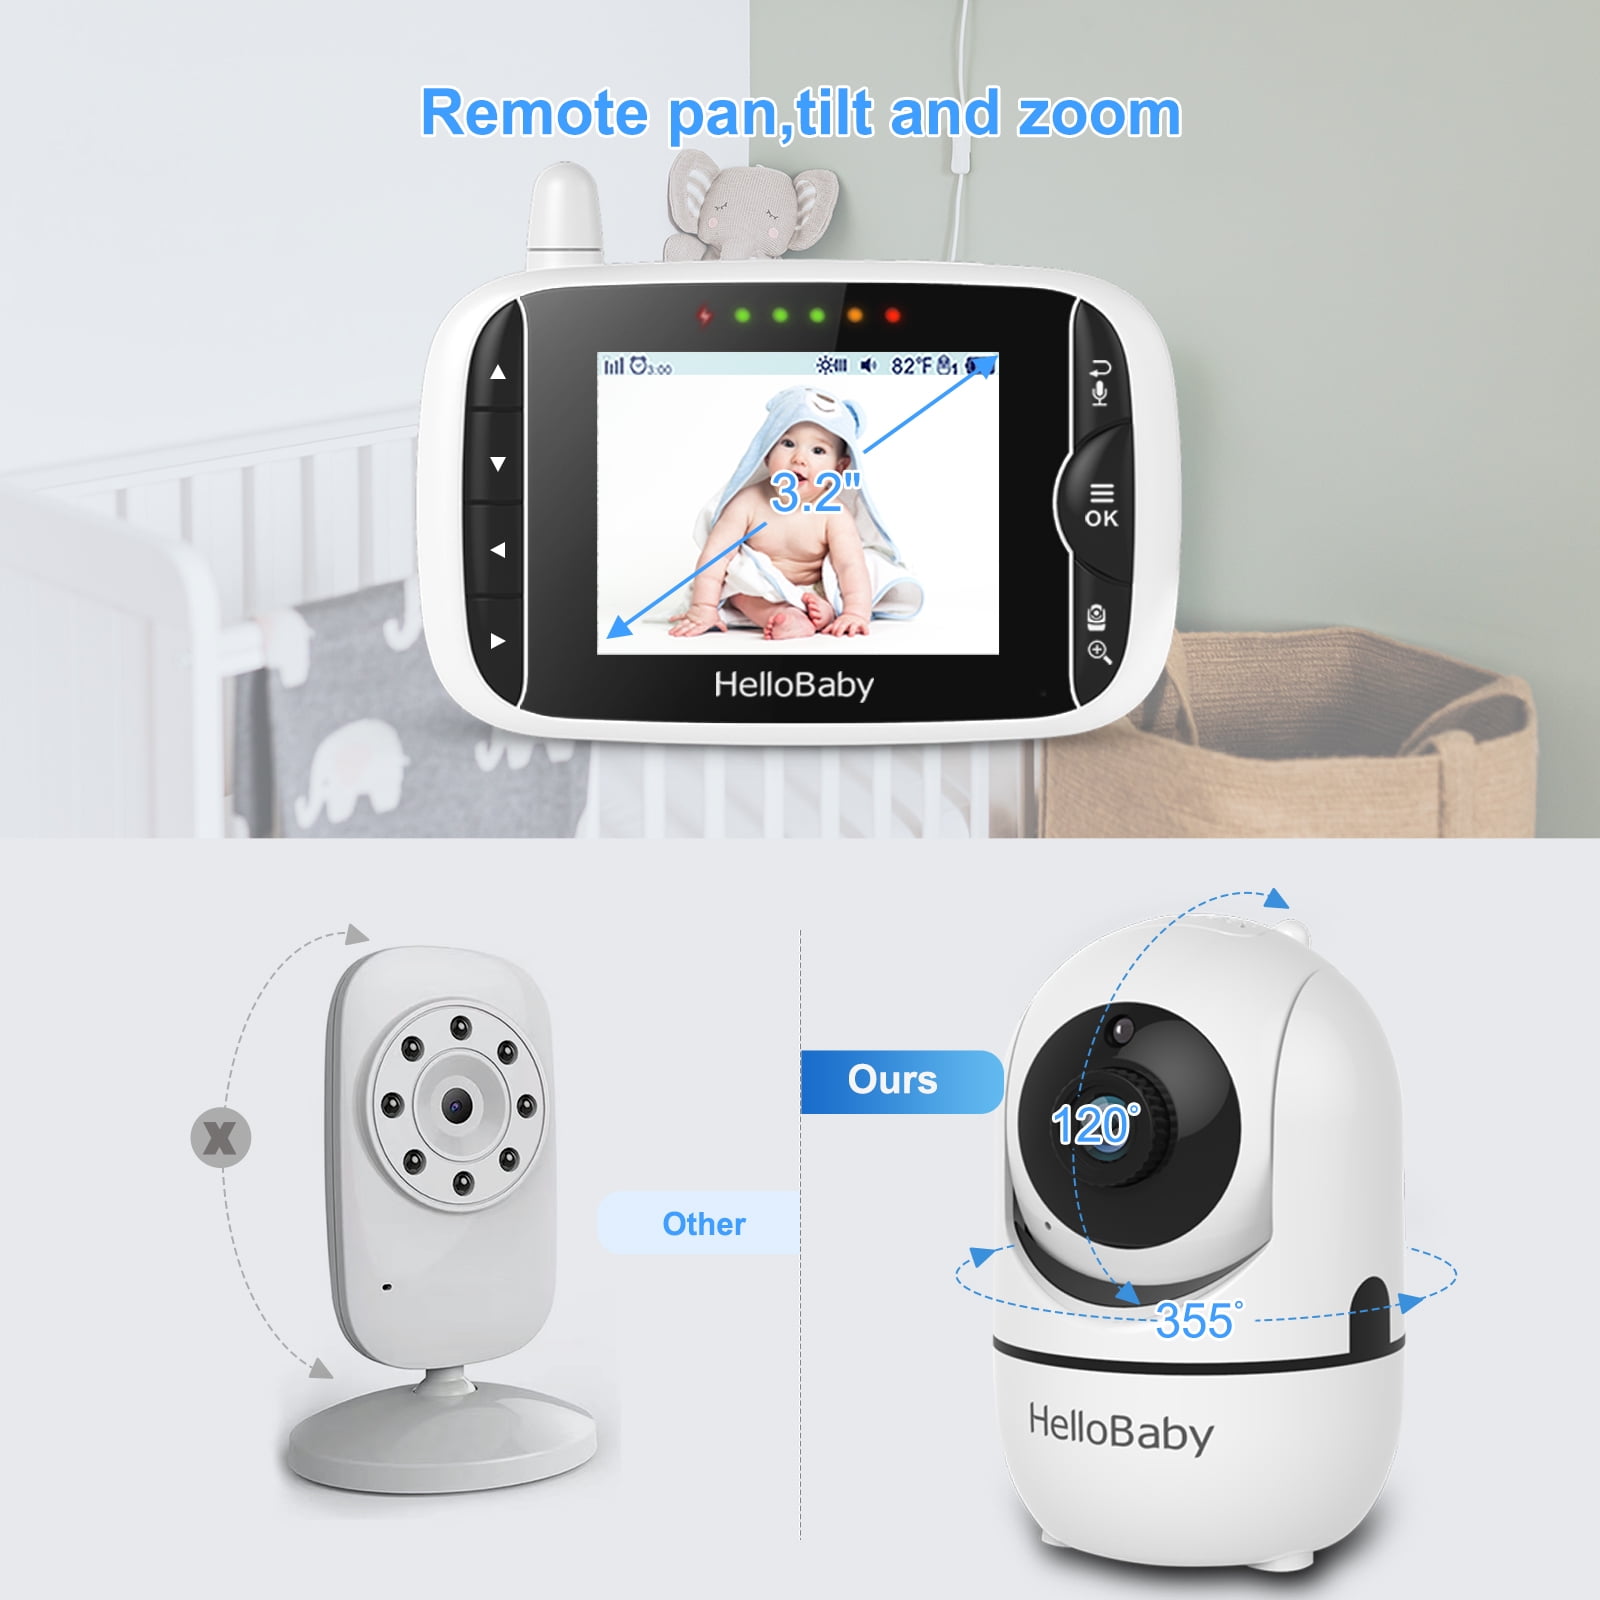  HelloBaby HB65 Baby Monitor with Camera+1 Additional Camera :  Baby